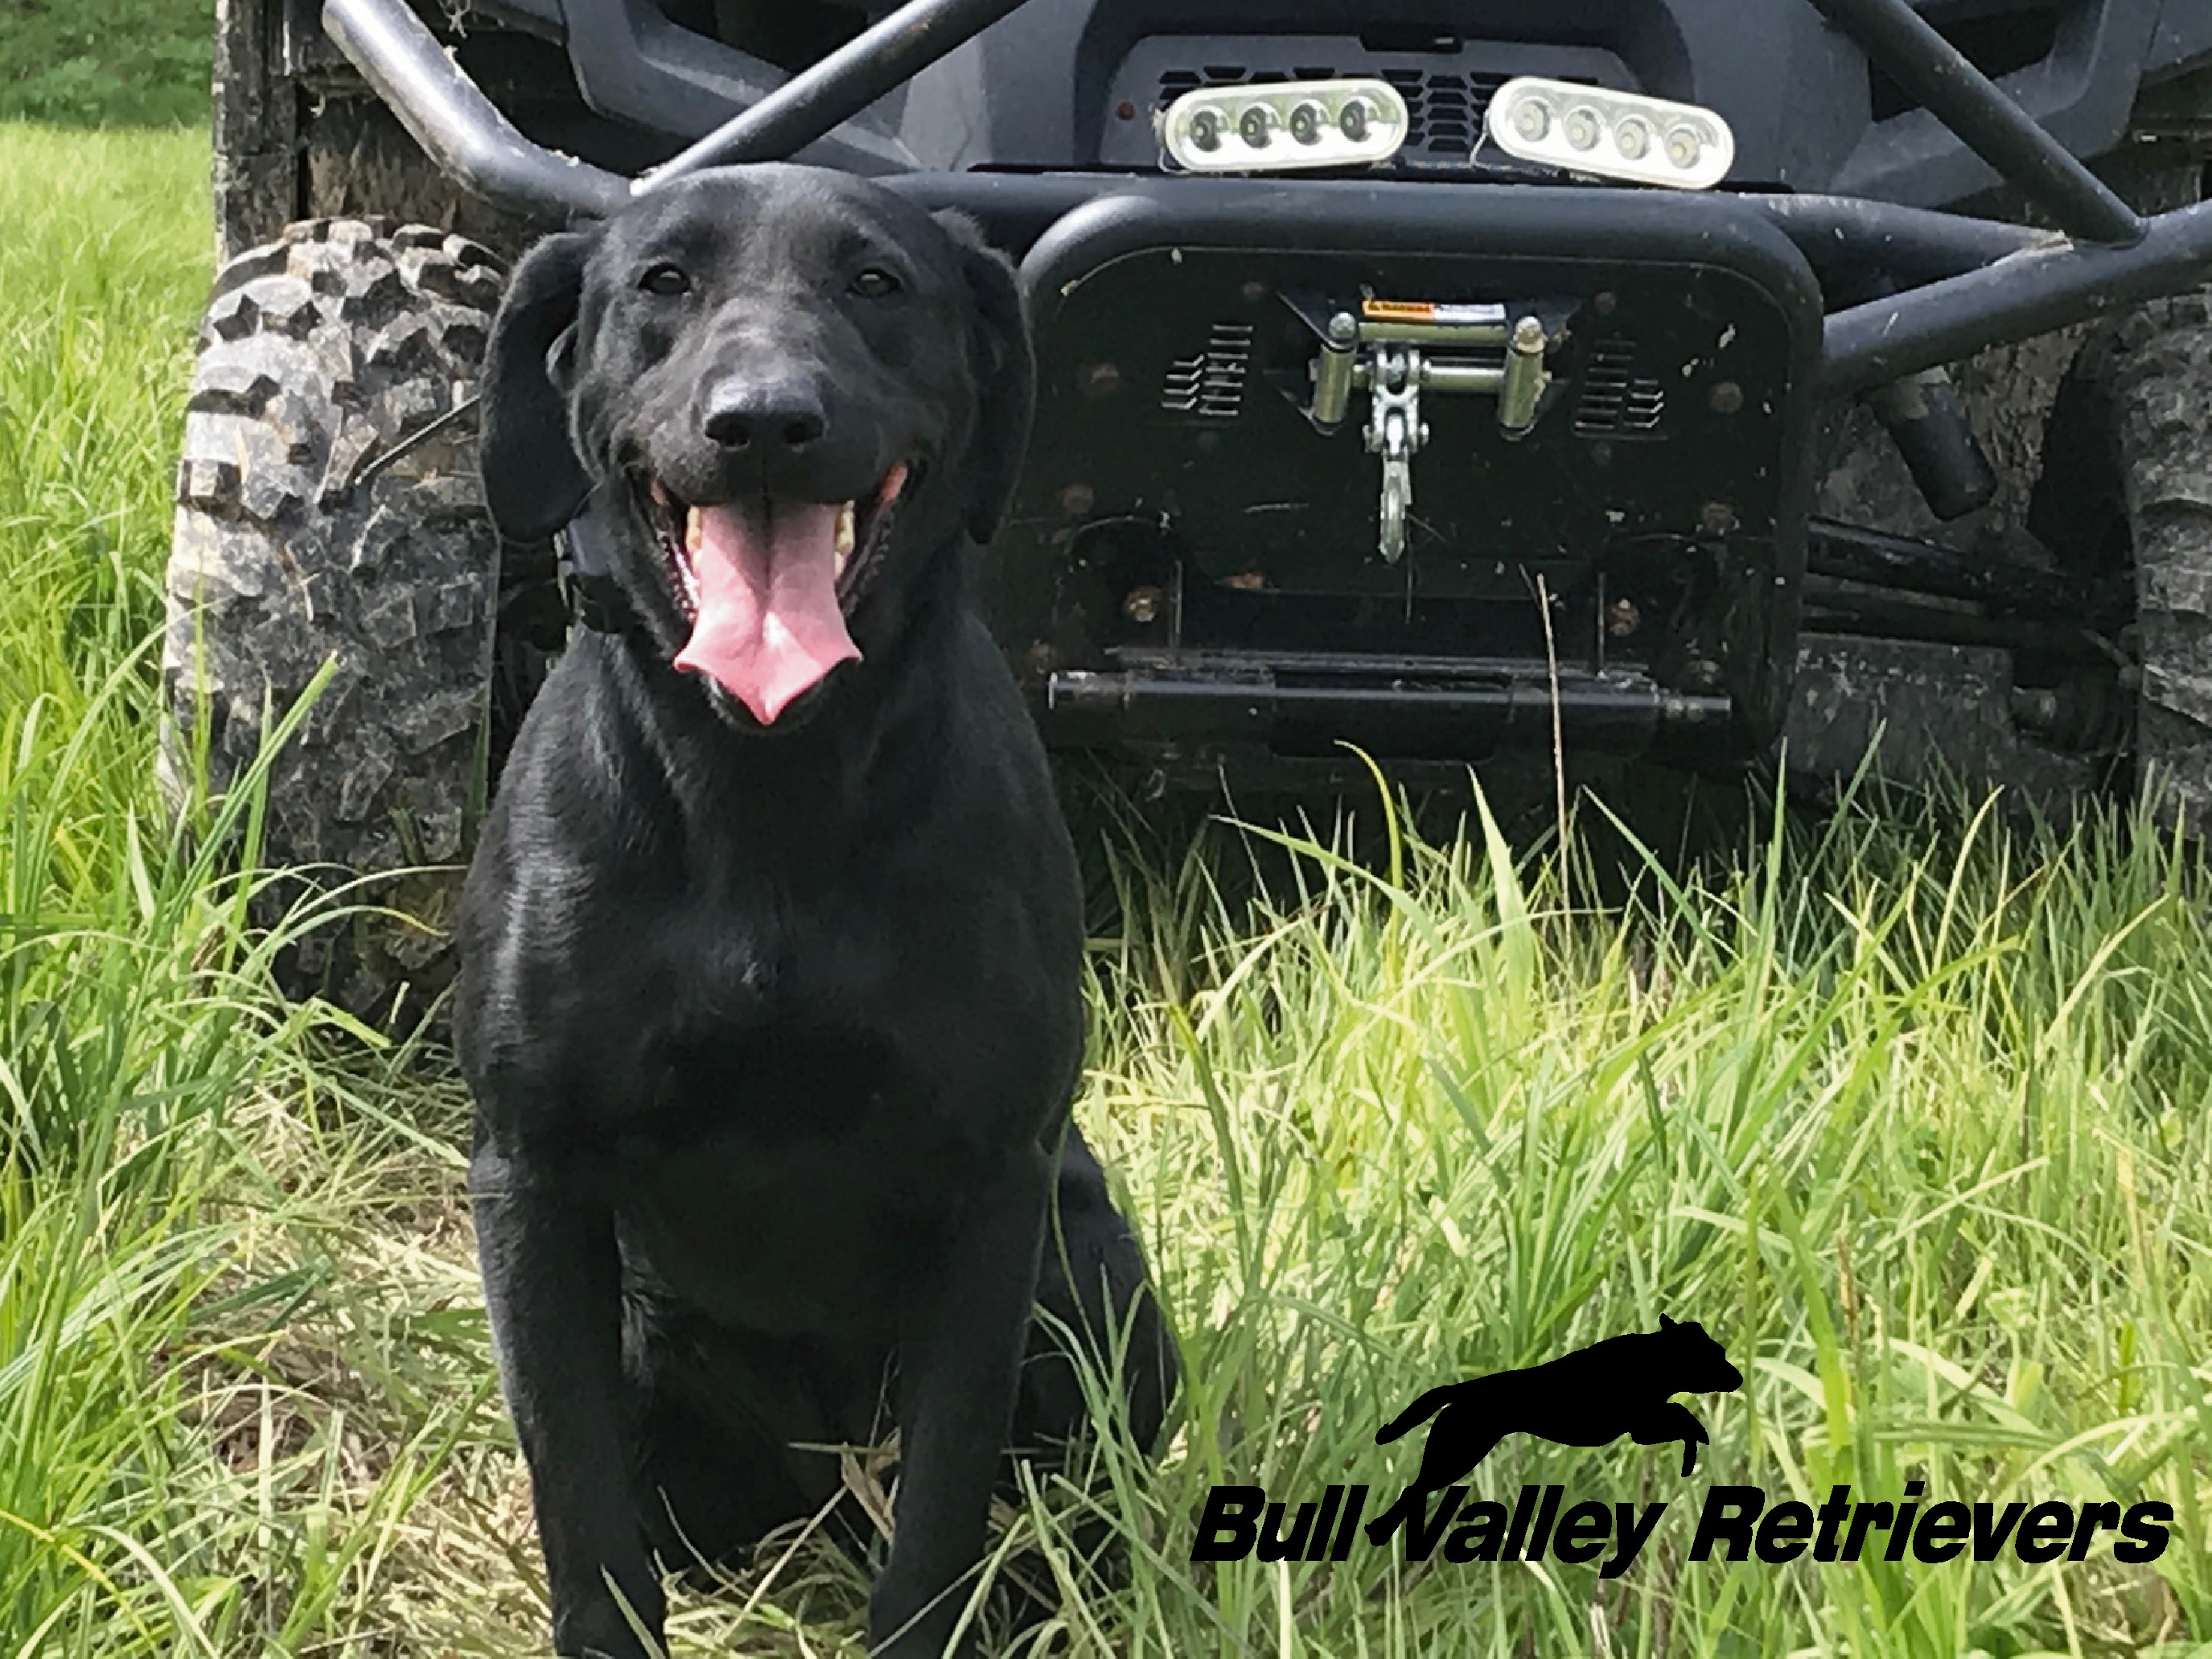 Bull Valley Retrievers Provides Overall Dog Training - McHenry Co., IL